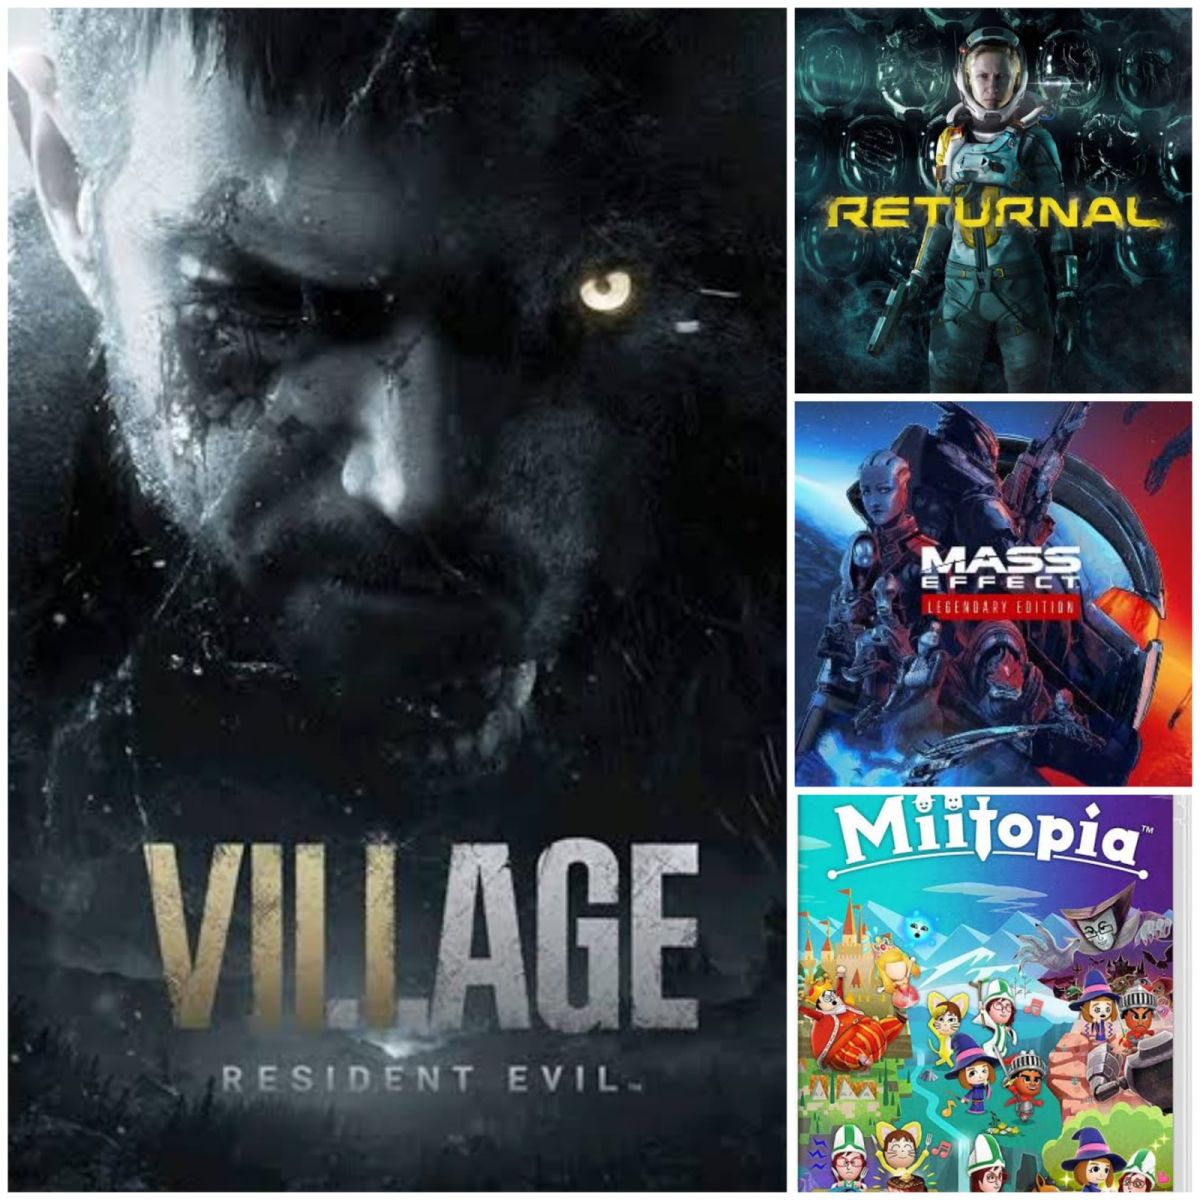 Review: Resident Evil Village, Returnal, Mass Effect Legendary Edition and Miitopia